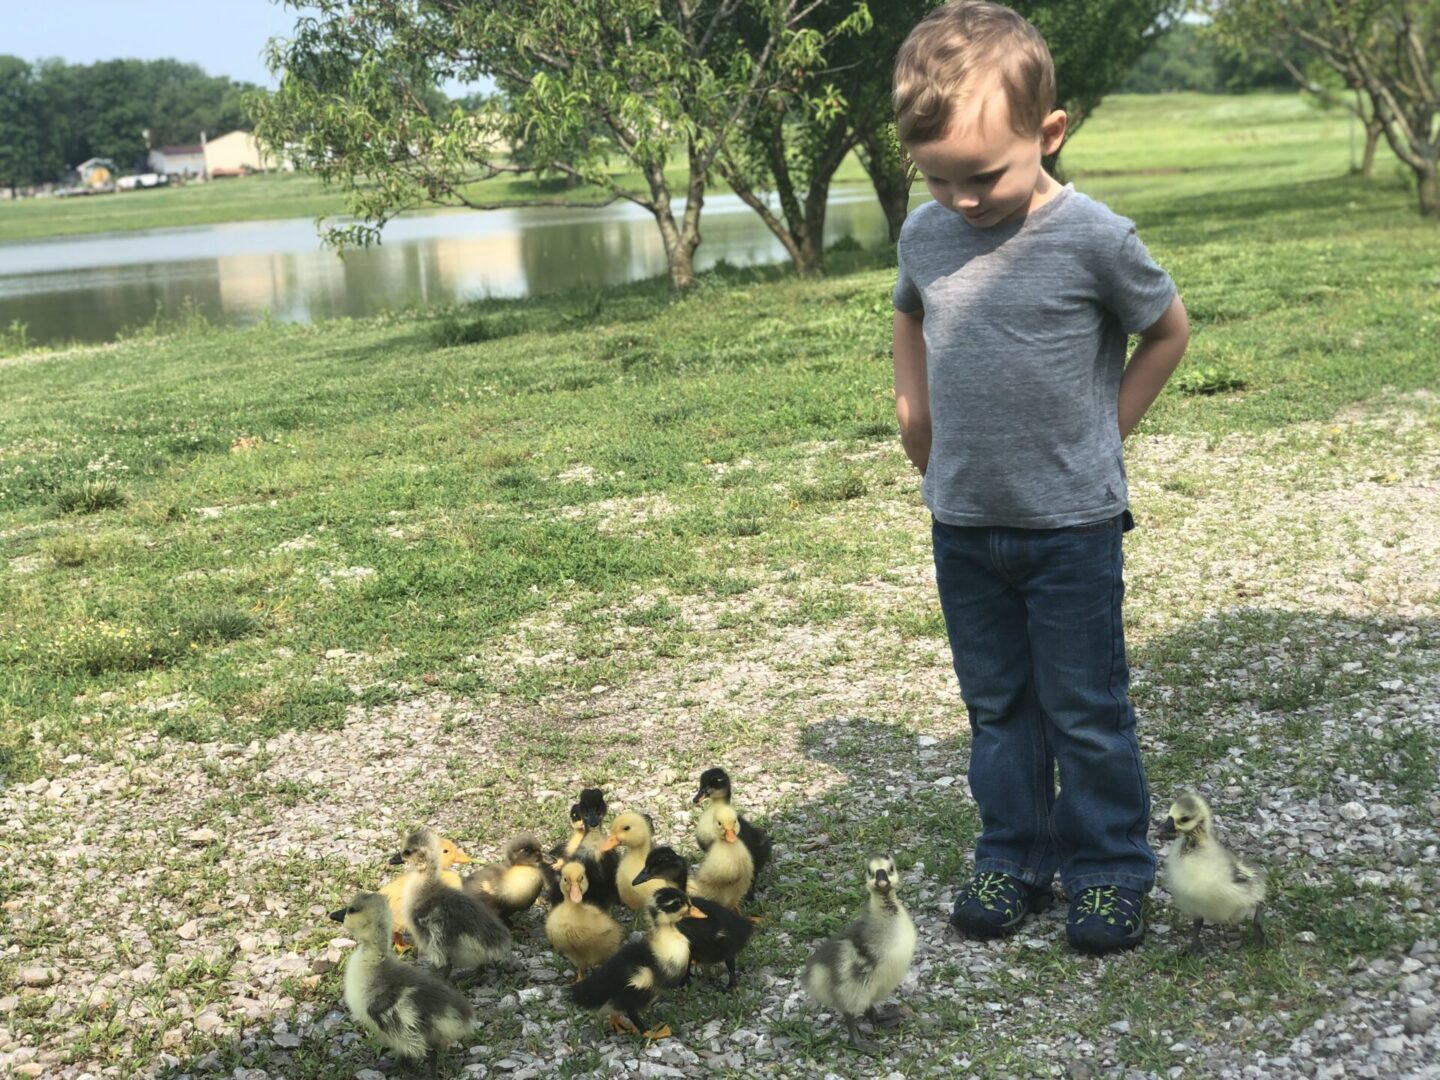 A child next to baby geese